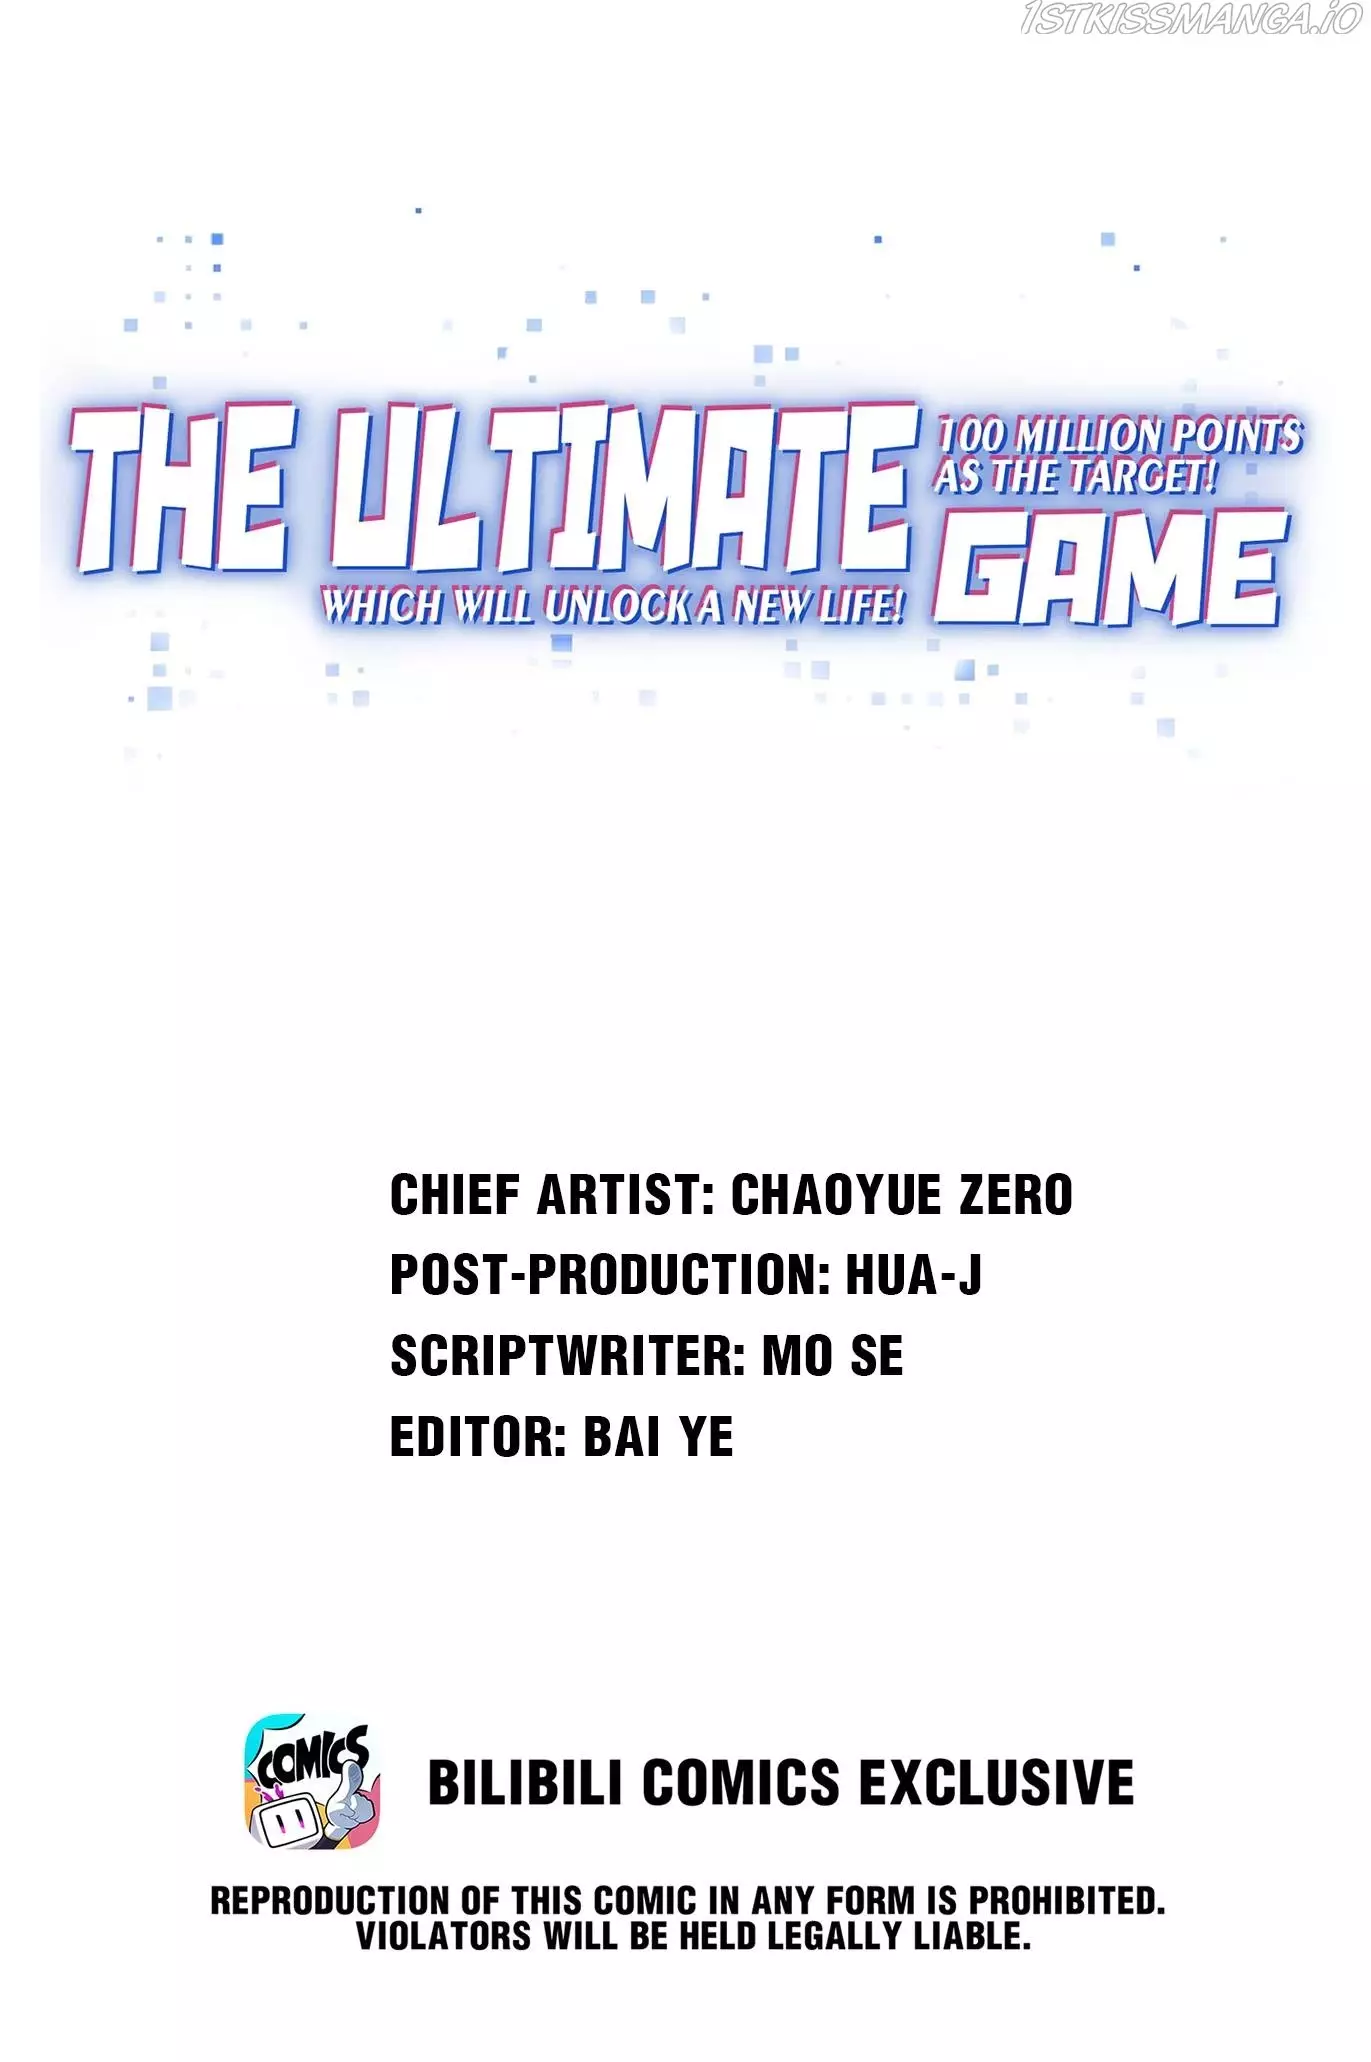 Target 1 Billion Points! Open The Ultimate Game Of Second Life! - 63 page 1-0f27fd66